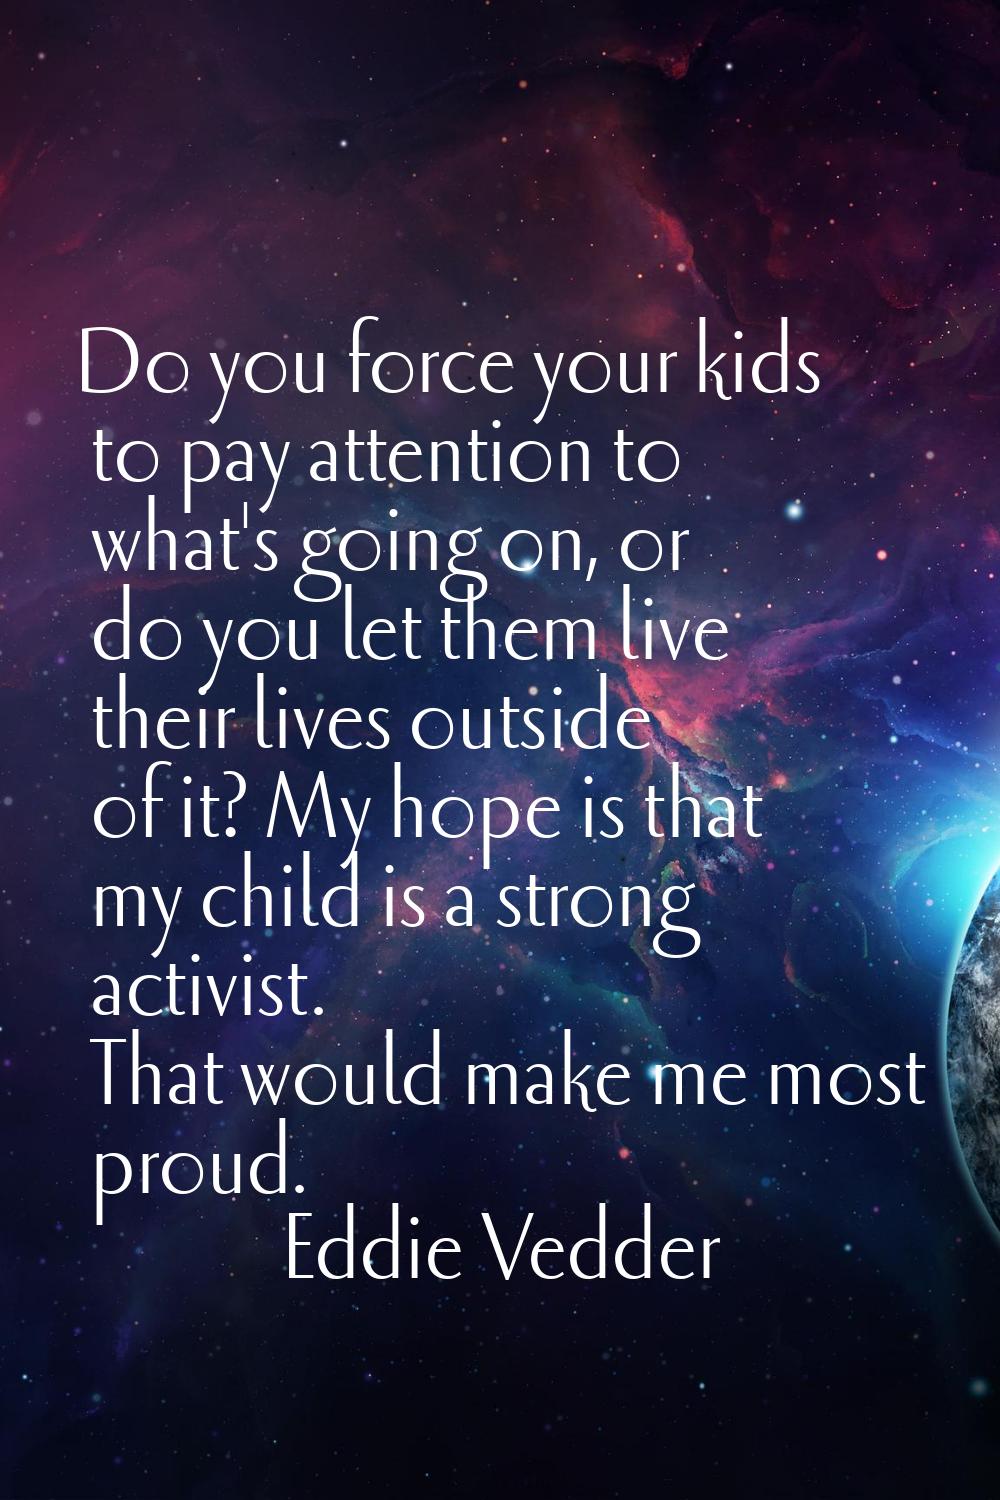 Do you force your kids to pay attention to what's going on, or do you let them live their lives out